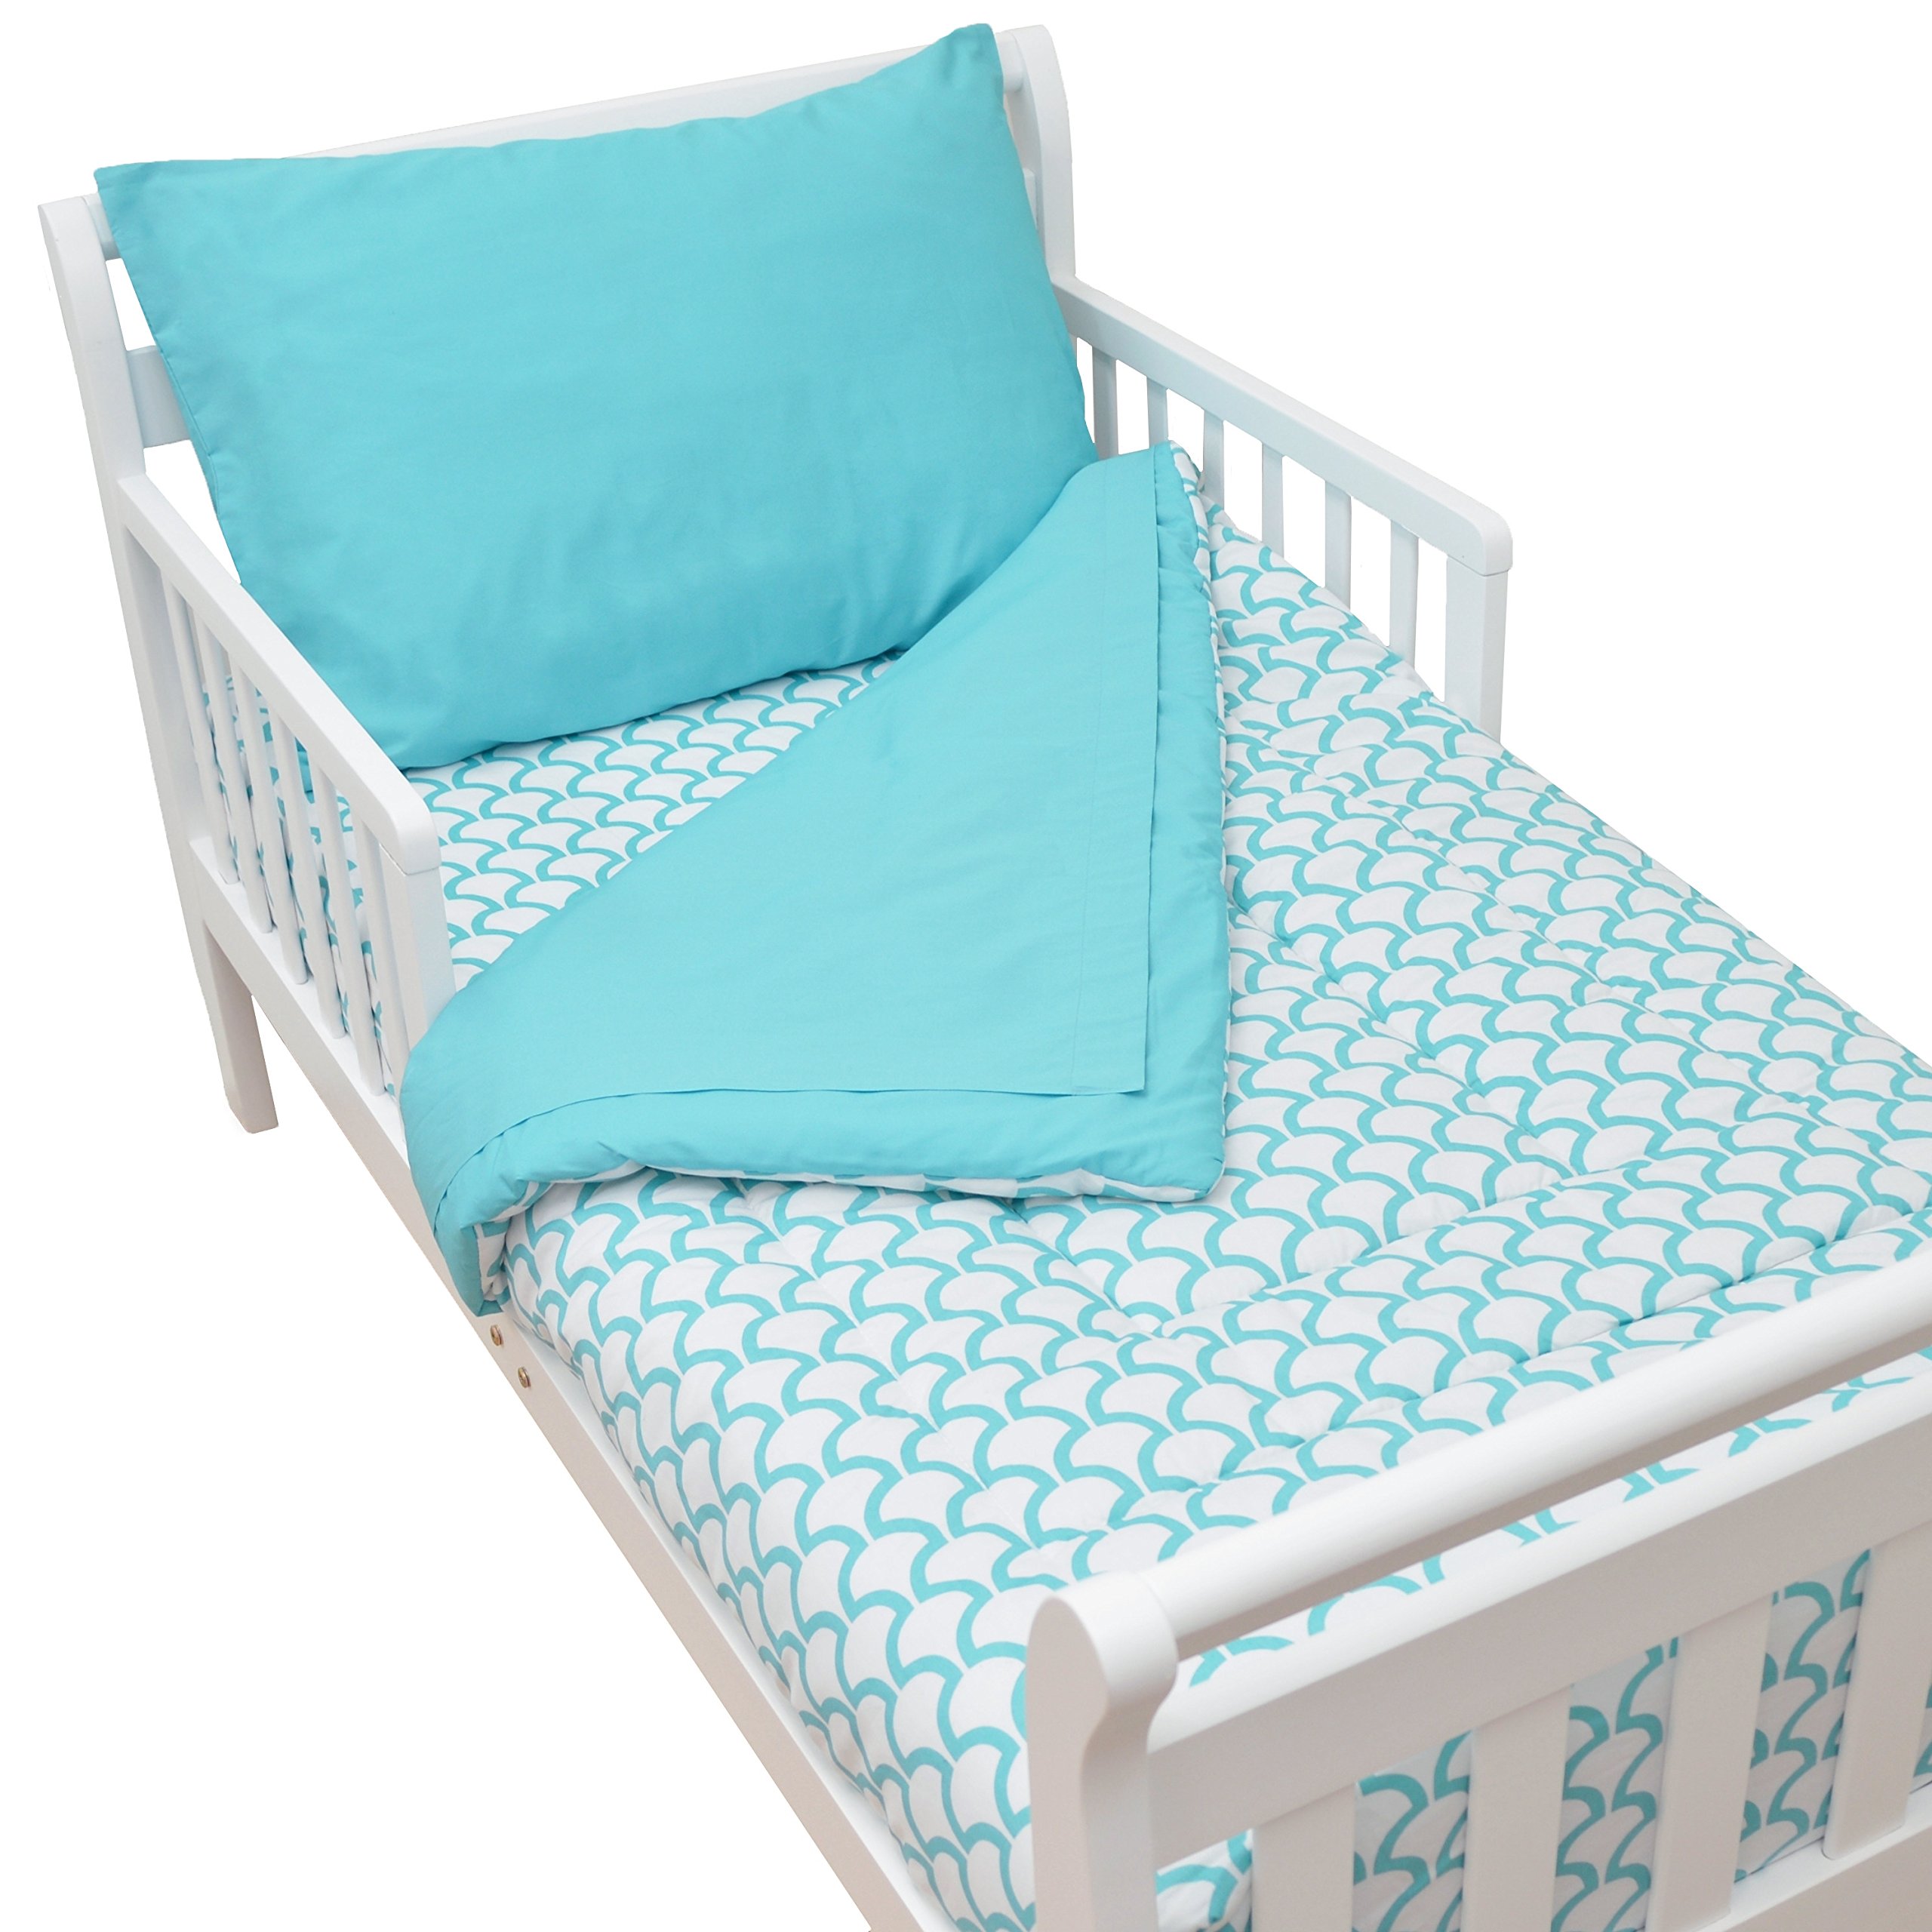 American Baby company 100 cotton Percale 4 Piece Toddler Bedding Set, Aqua Waves, for Boys girls